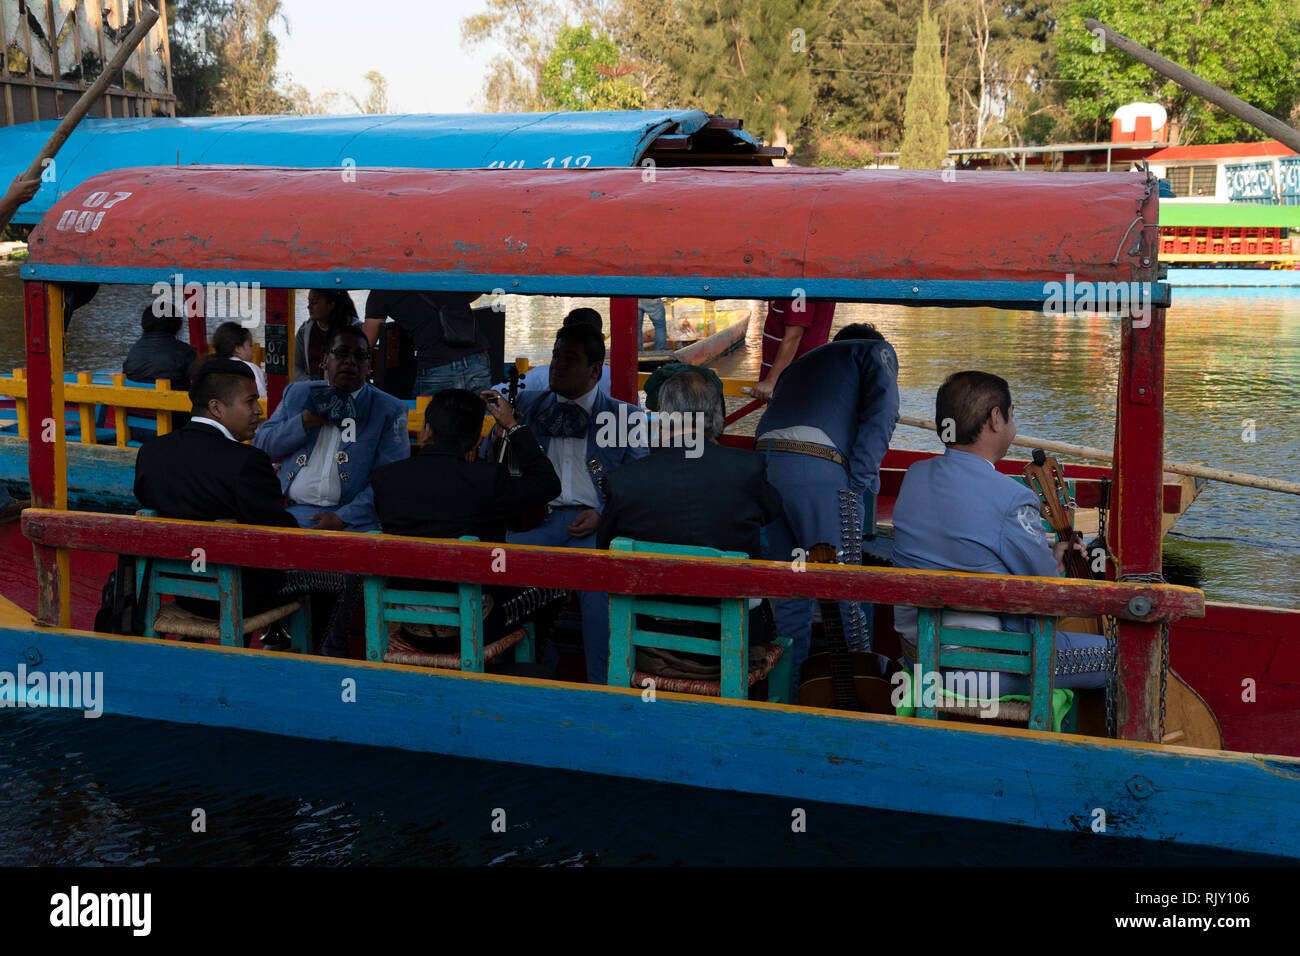 MEXICO CITY, MEXICO - JANUARY 30 2019 - Xochimilco the mexican little venice attract tourists and other city residents to ride on colorful gondola-lik Stock Photo